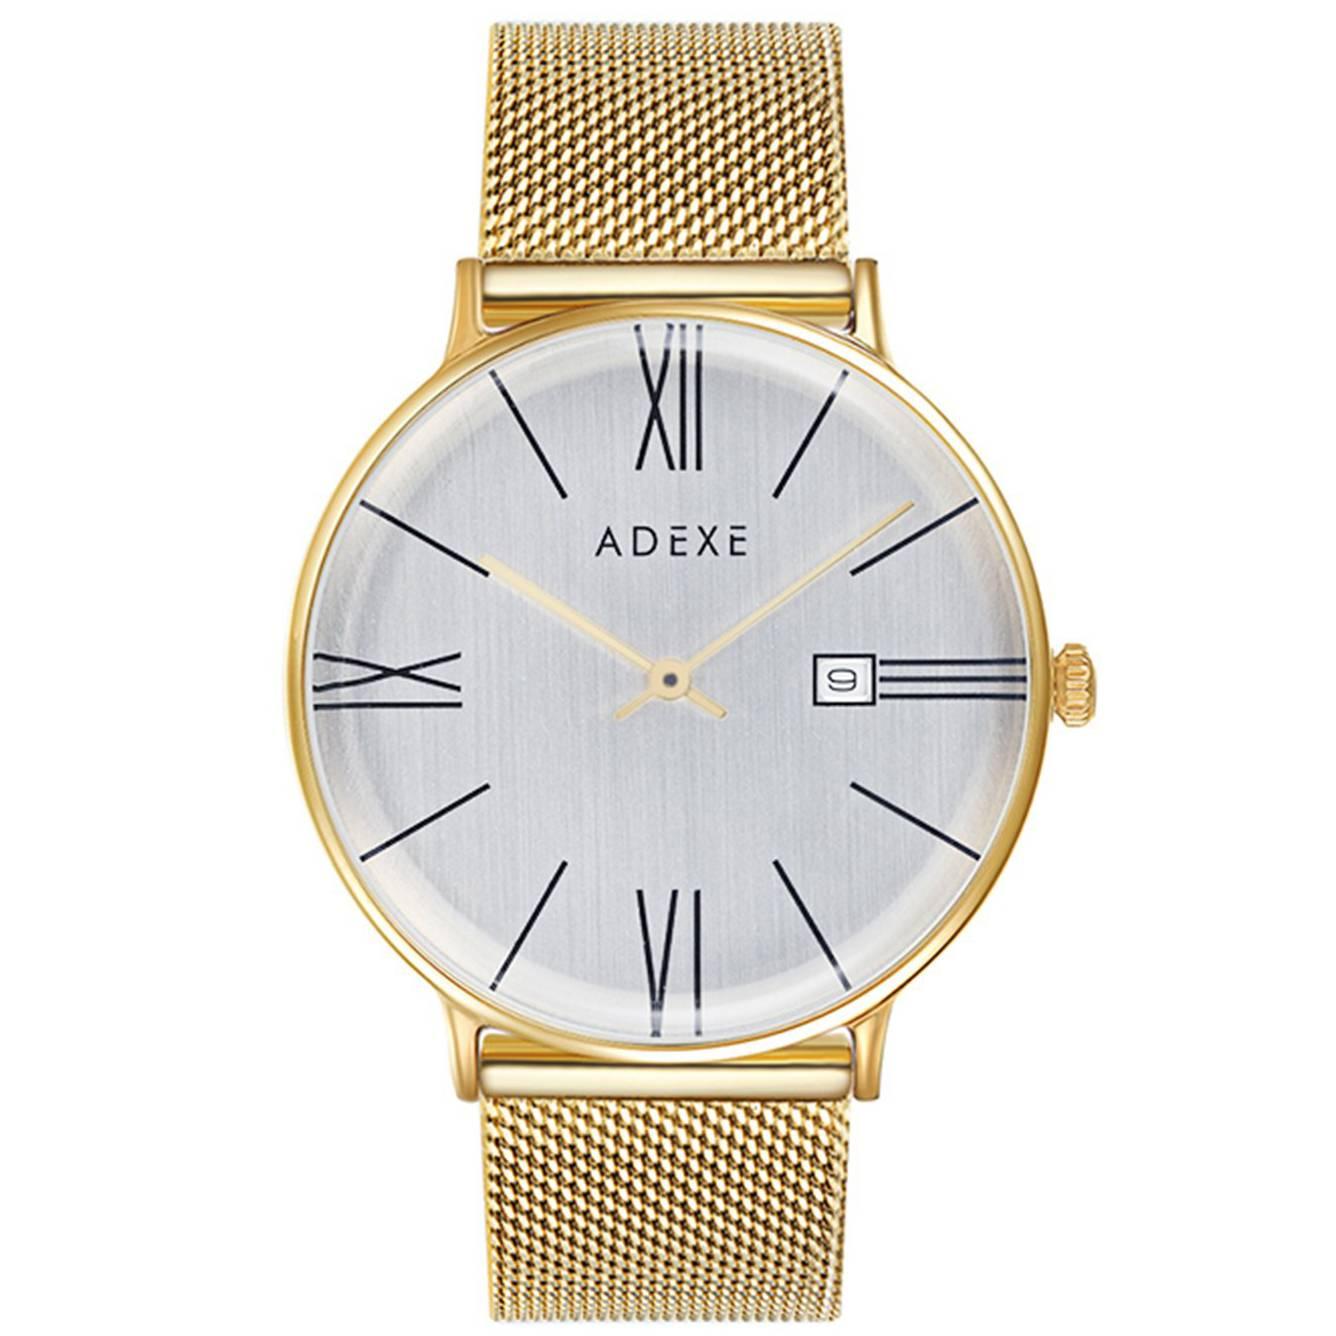 Meek Stainless Steel Gold Mesh Band Wristwatch